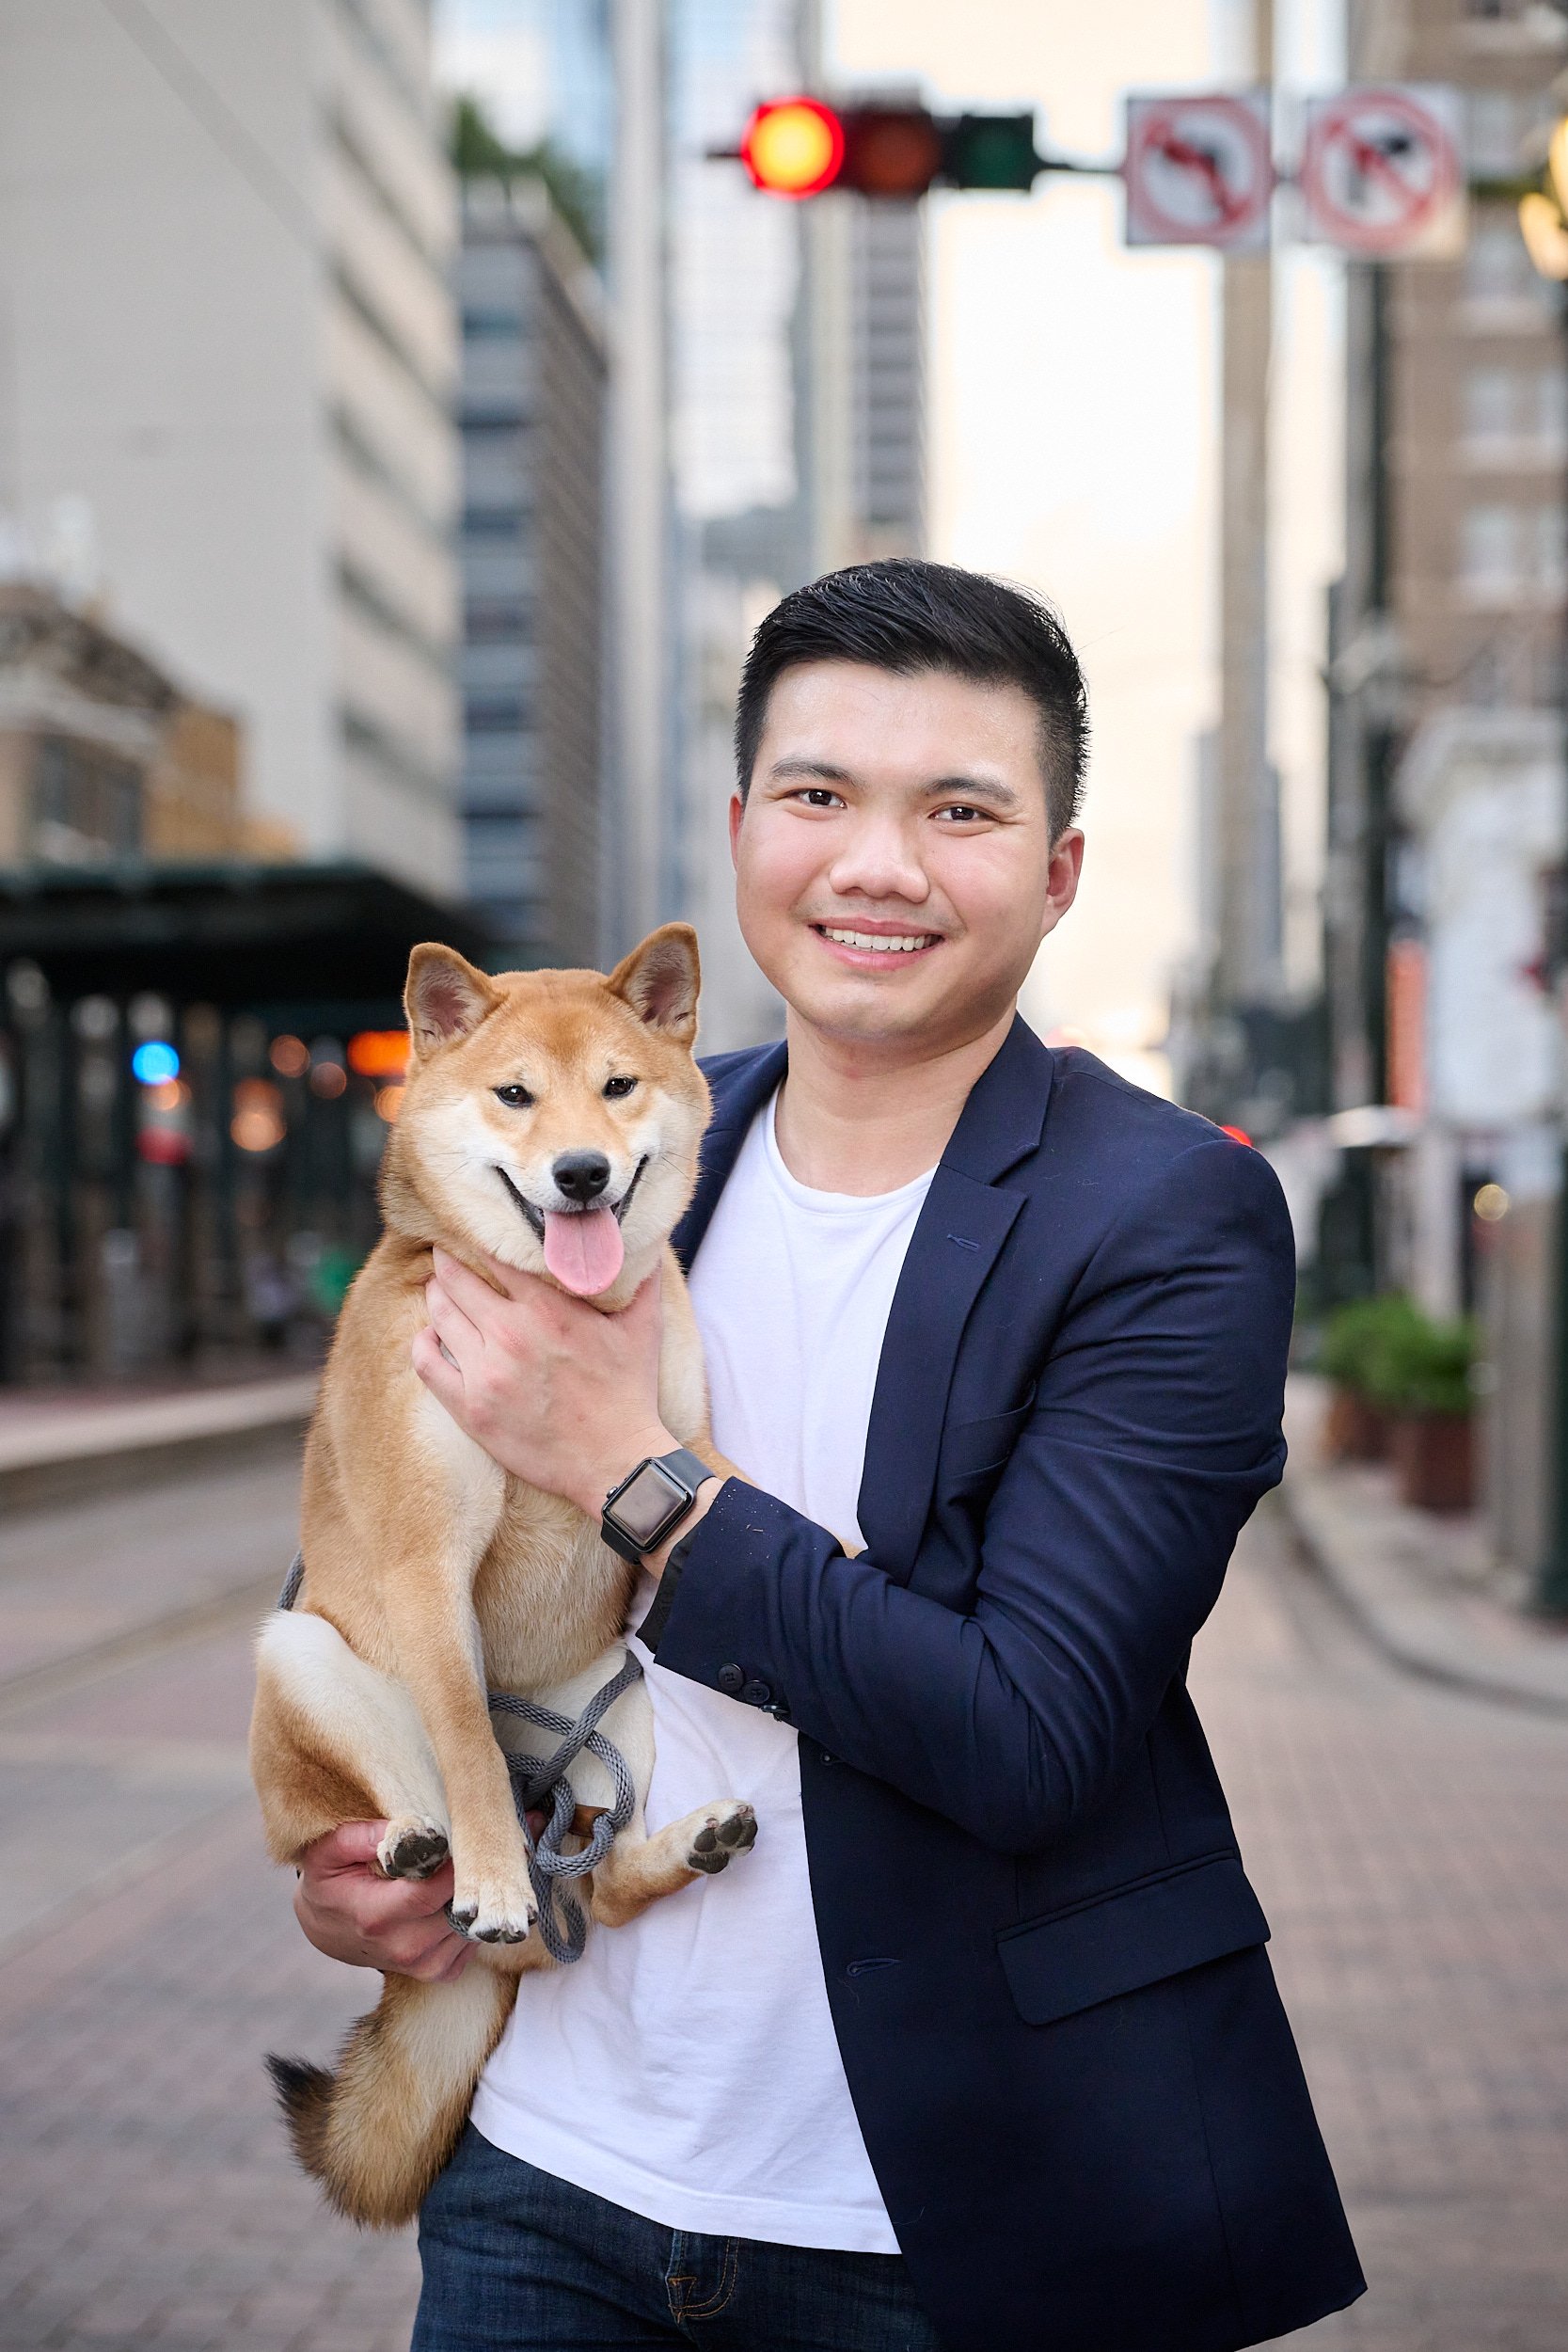  HOUSTON, TEXAS - AUGUST 27TH 2022: Yosa Puspo is posing in a suit with his dog for fun and memorable portraits in Downtown Houston. Market Square, Main Street and cityscape are perfect backgrounds. 